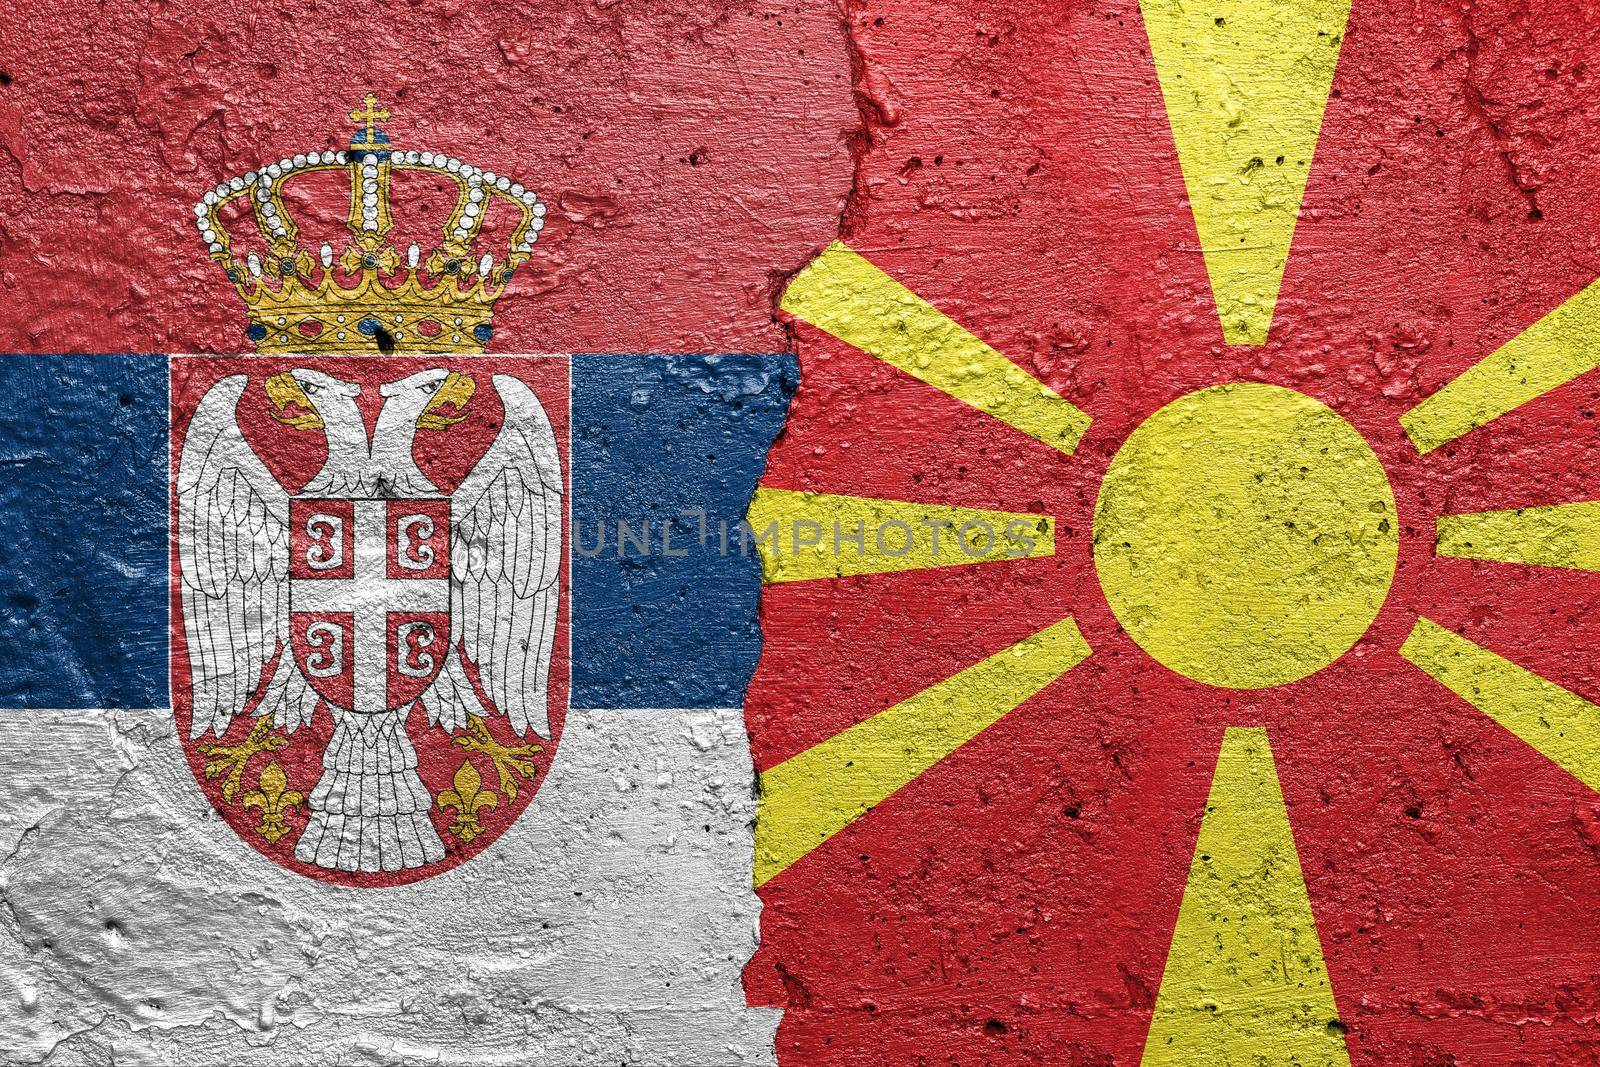 Serbia and North Macedonia flags  - Cracked concrete wall painted with a Serbian flag on the left and a North Macedonian flag on the right